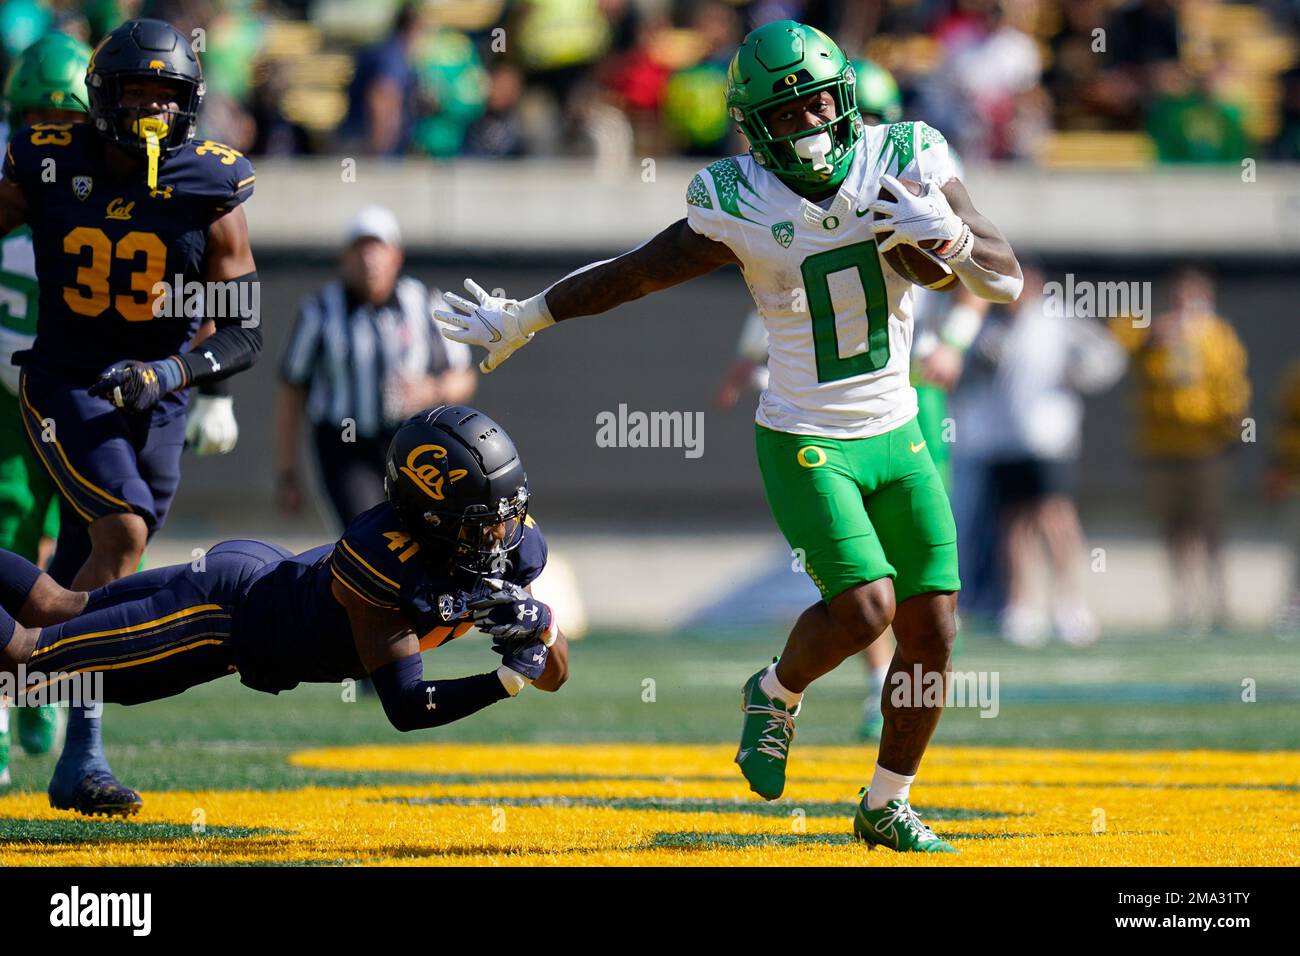 California cornerback Isaiah Young (41) is unable to tackle Oregon